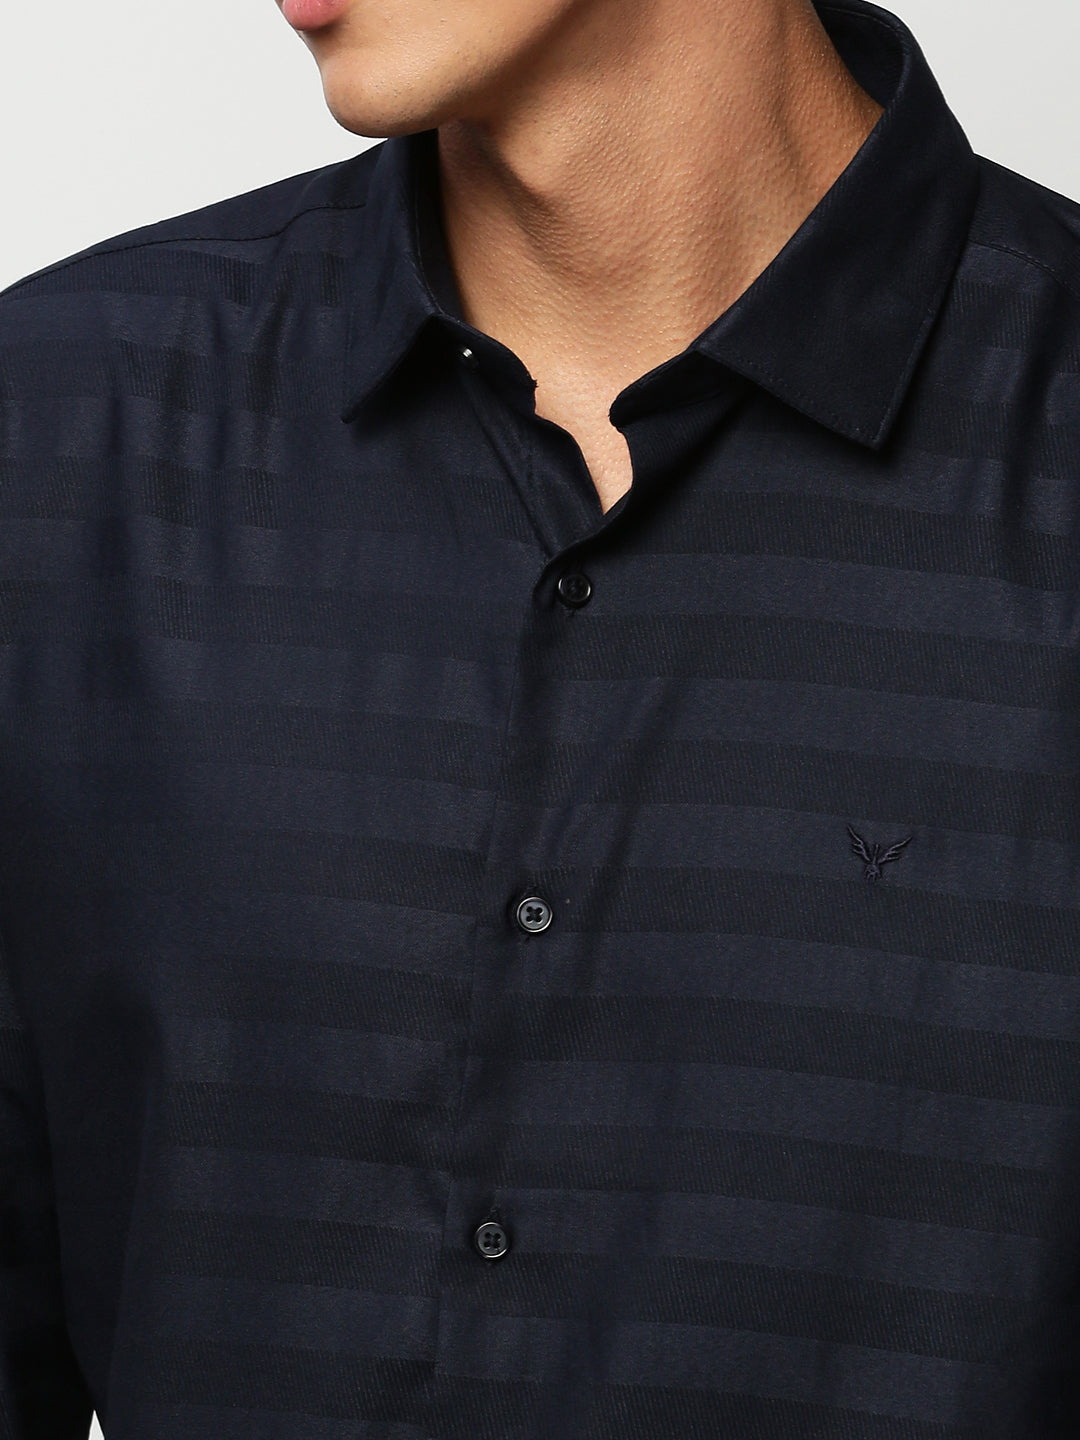 Men Navy Striped Casual Casual Shirts